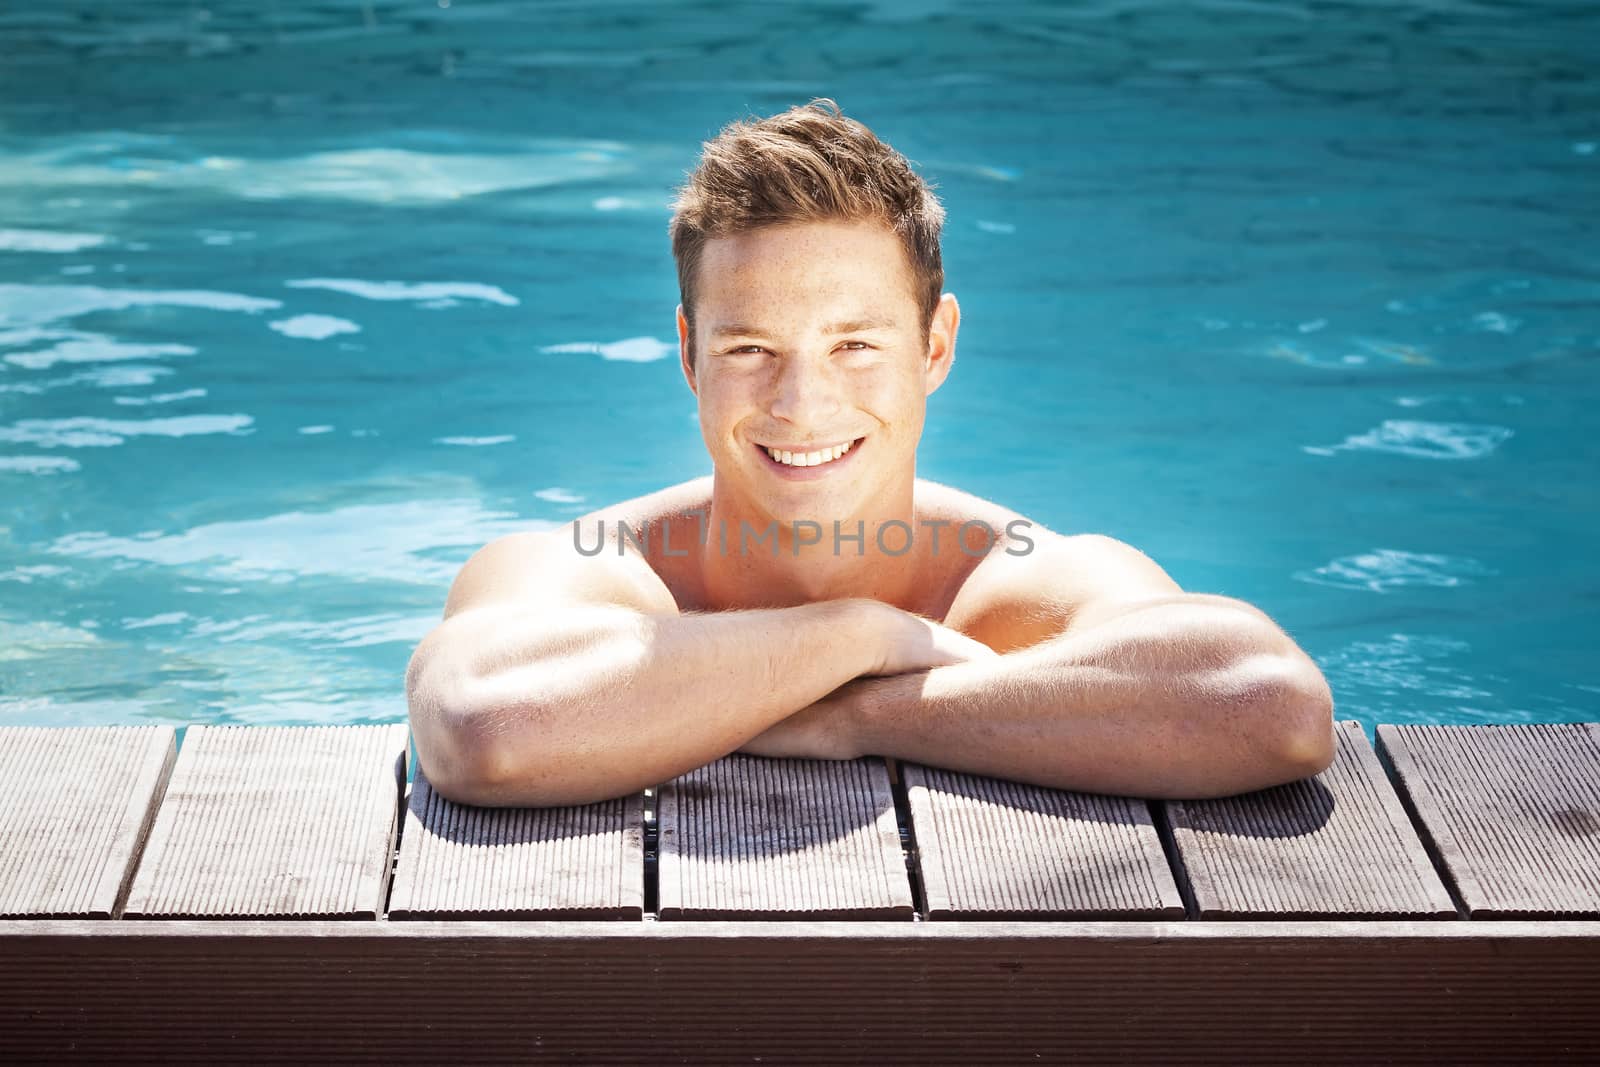 An image of a handsome man in the pool